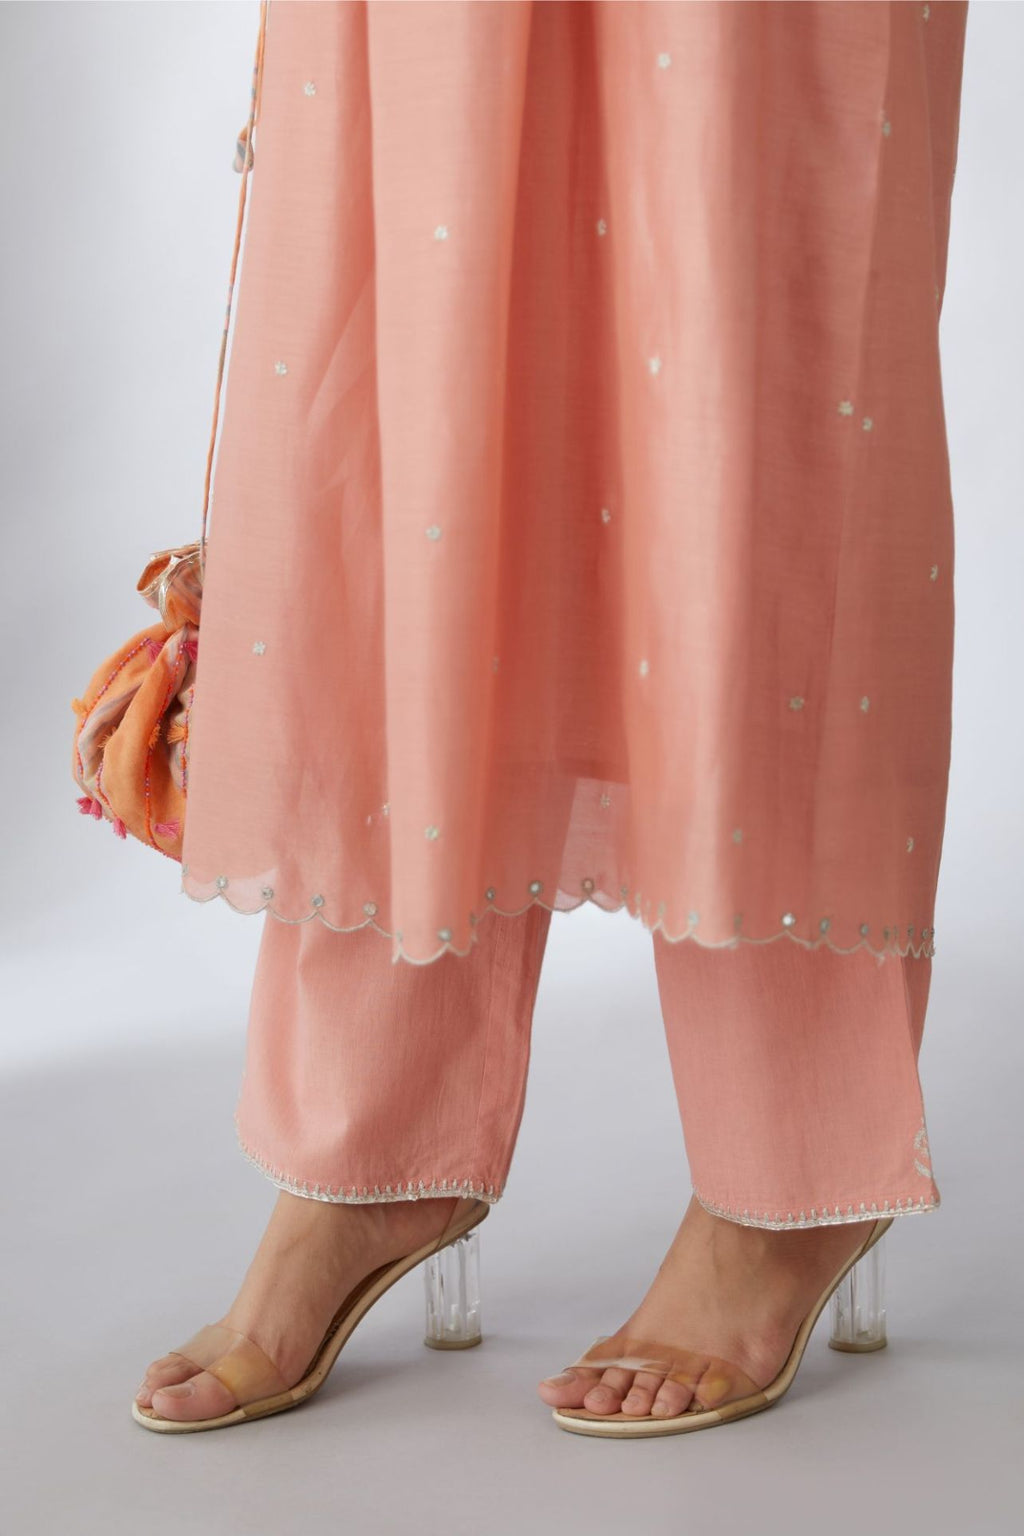 Silk chanderi Kurta dress set with all-over delicately embroidered silver zari flowers and scalloped edges, highlighted with hand attached mirrors.